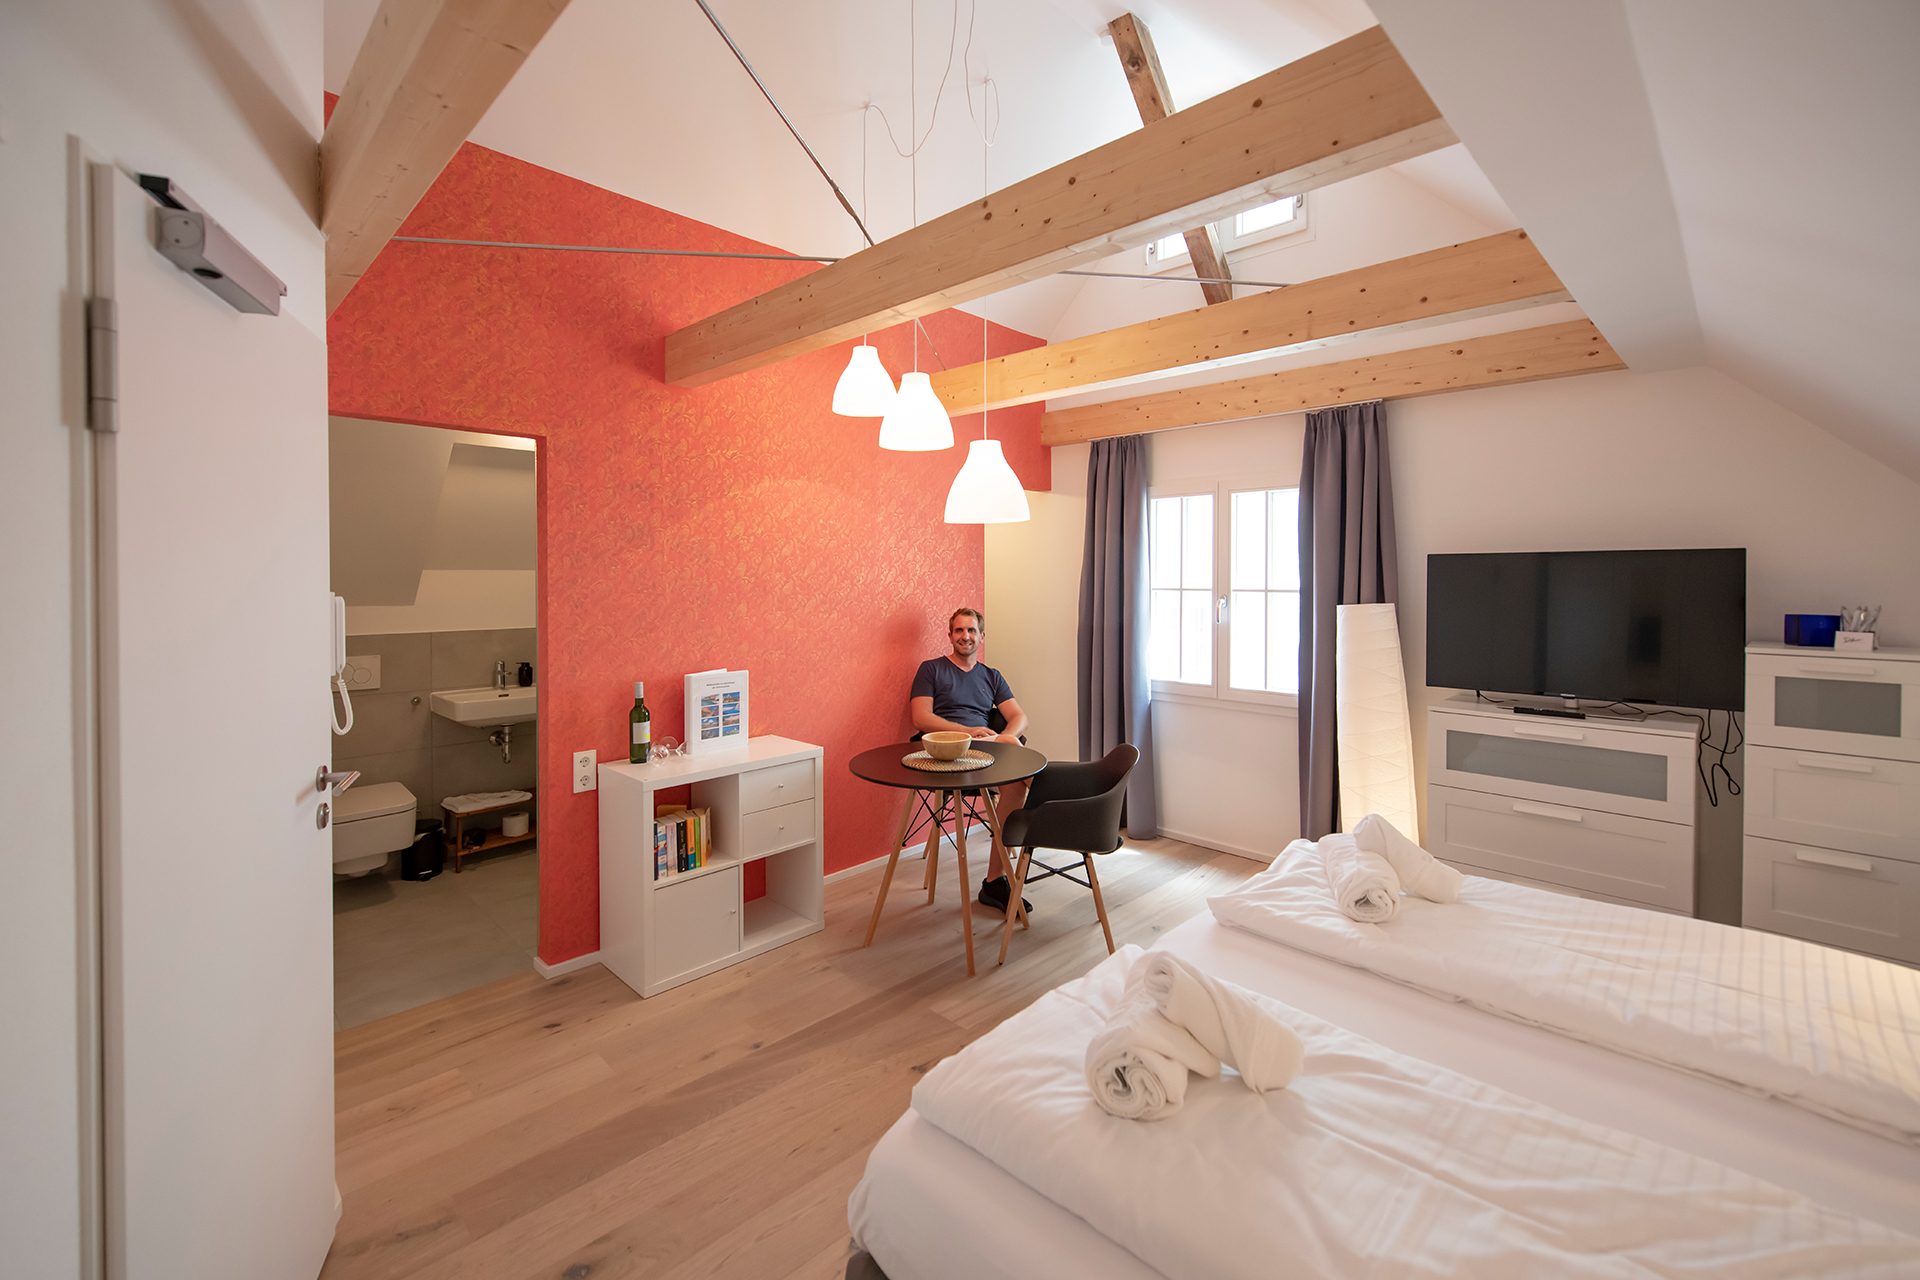 Holiday apartments on Lake Constance: Guest House "Am Schlossplatz", Room #5